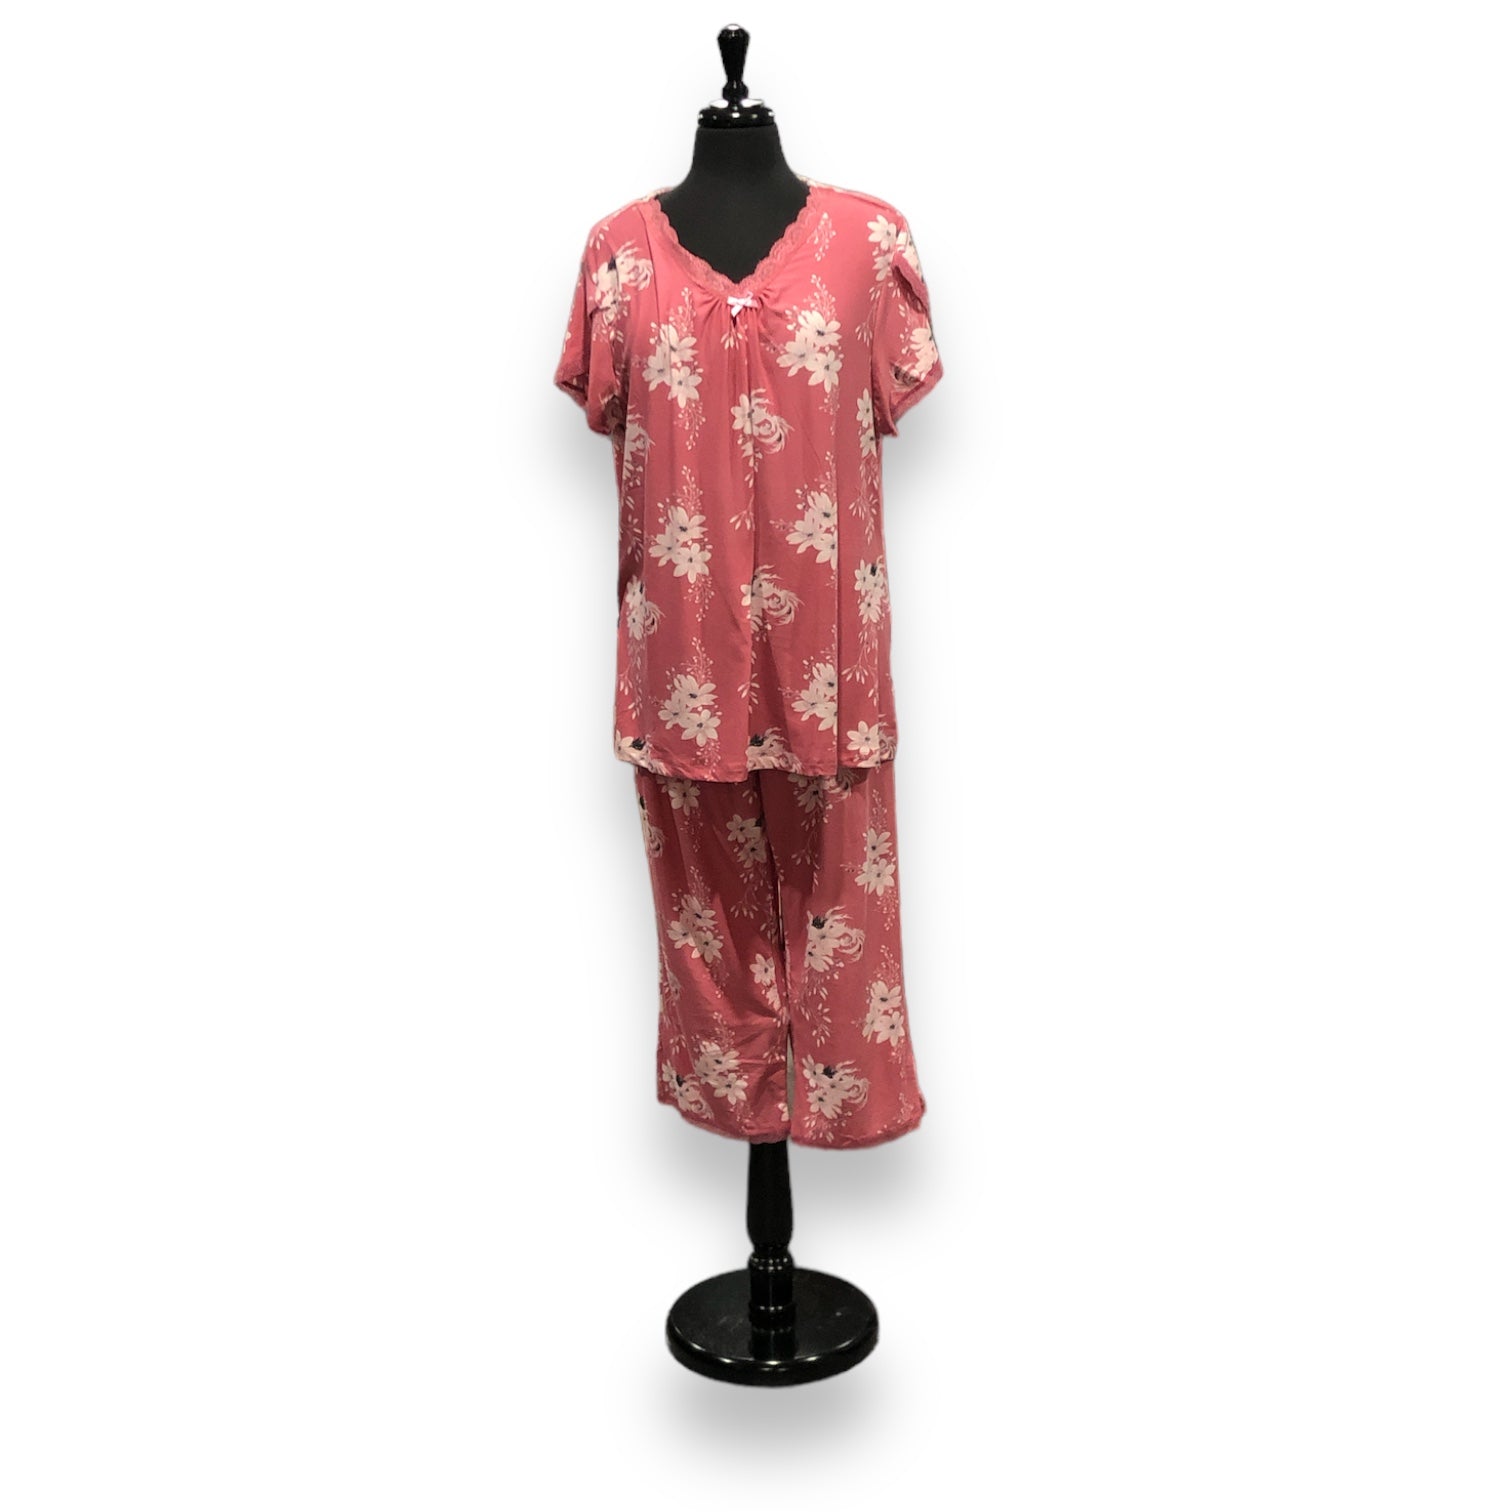 Women's Peached Jersey Knit Pajama Set with Lace Trim & Satin Bow